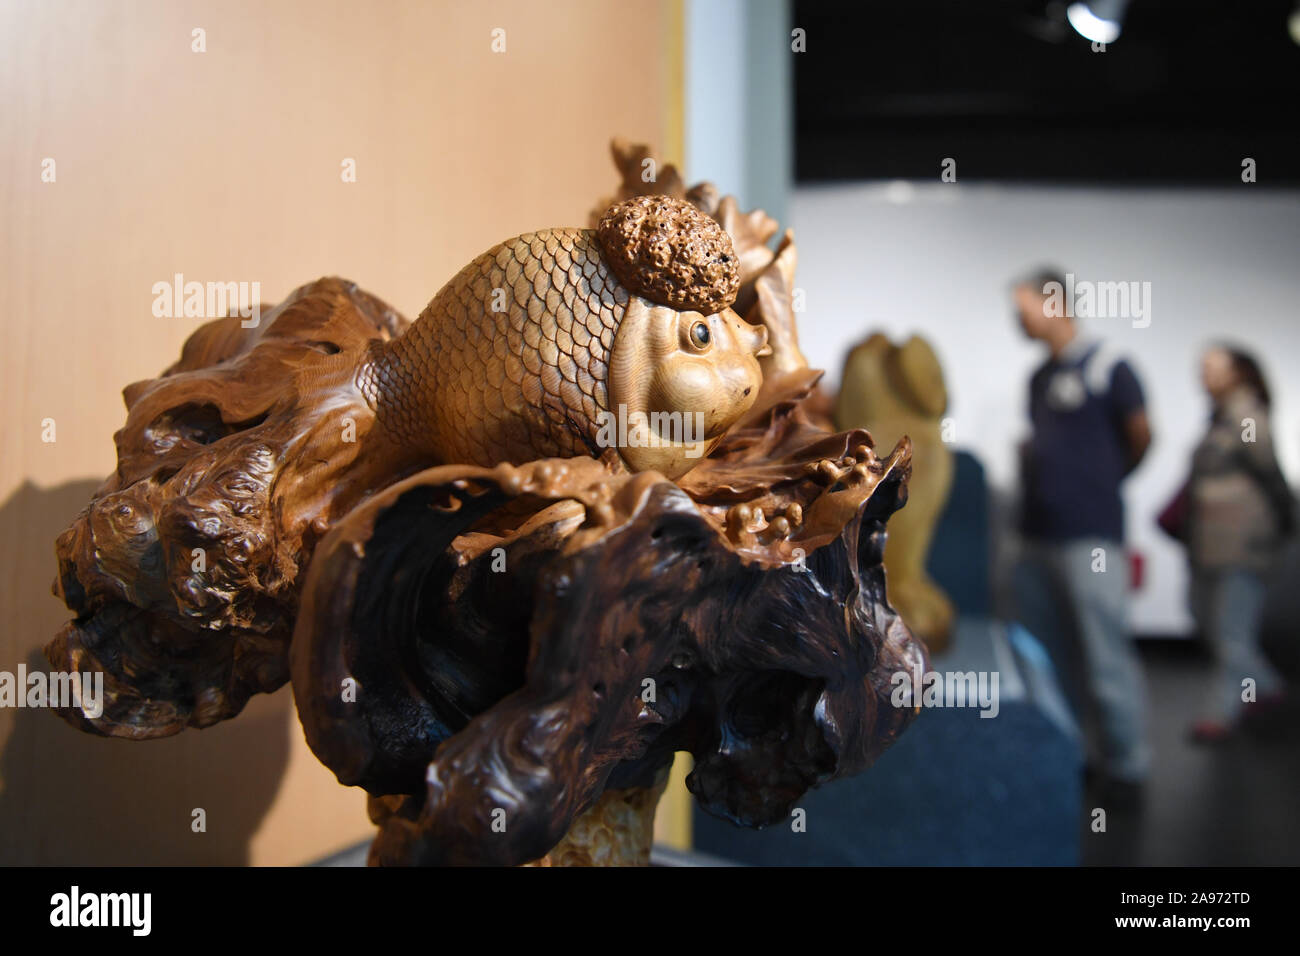 191113) -- MIAOLI, Nov. 13, 2019 (Xinhua) -- Photo taken on Nov. 13, 2019  shows a wood carving work during an exhibition at the Sanyi Wood Sculpture  Museum in Miaoli County, southeast